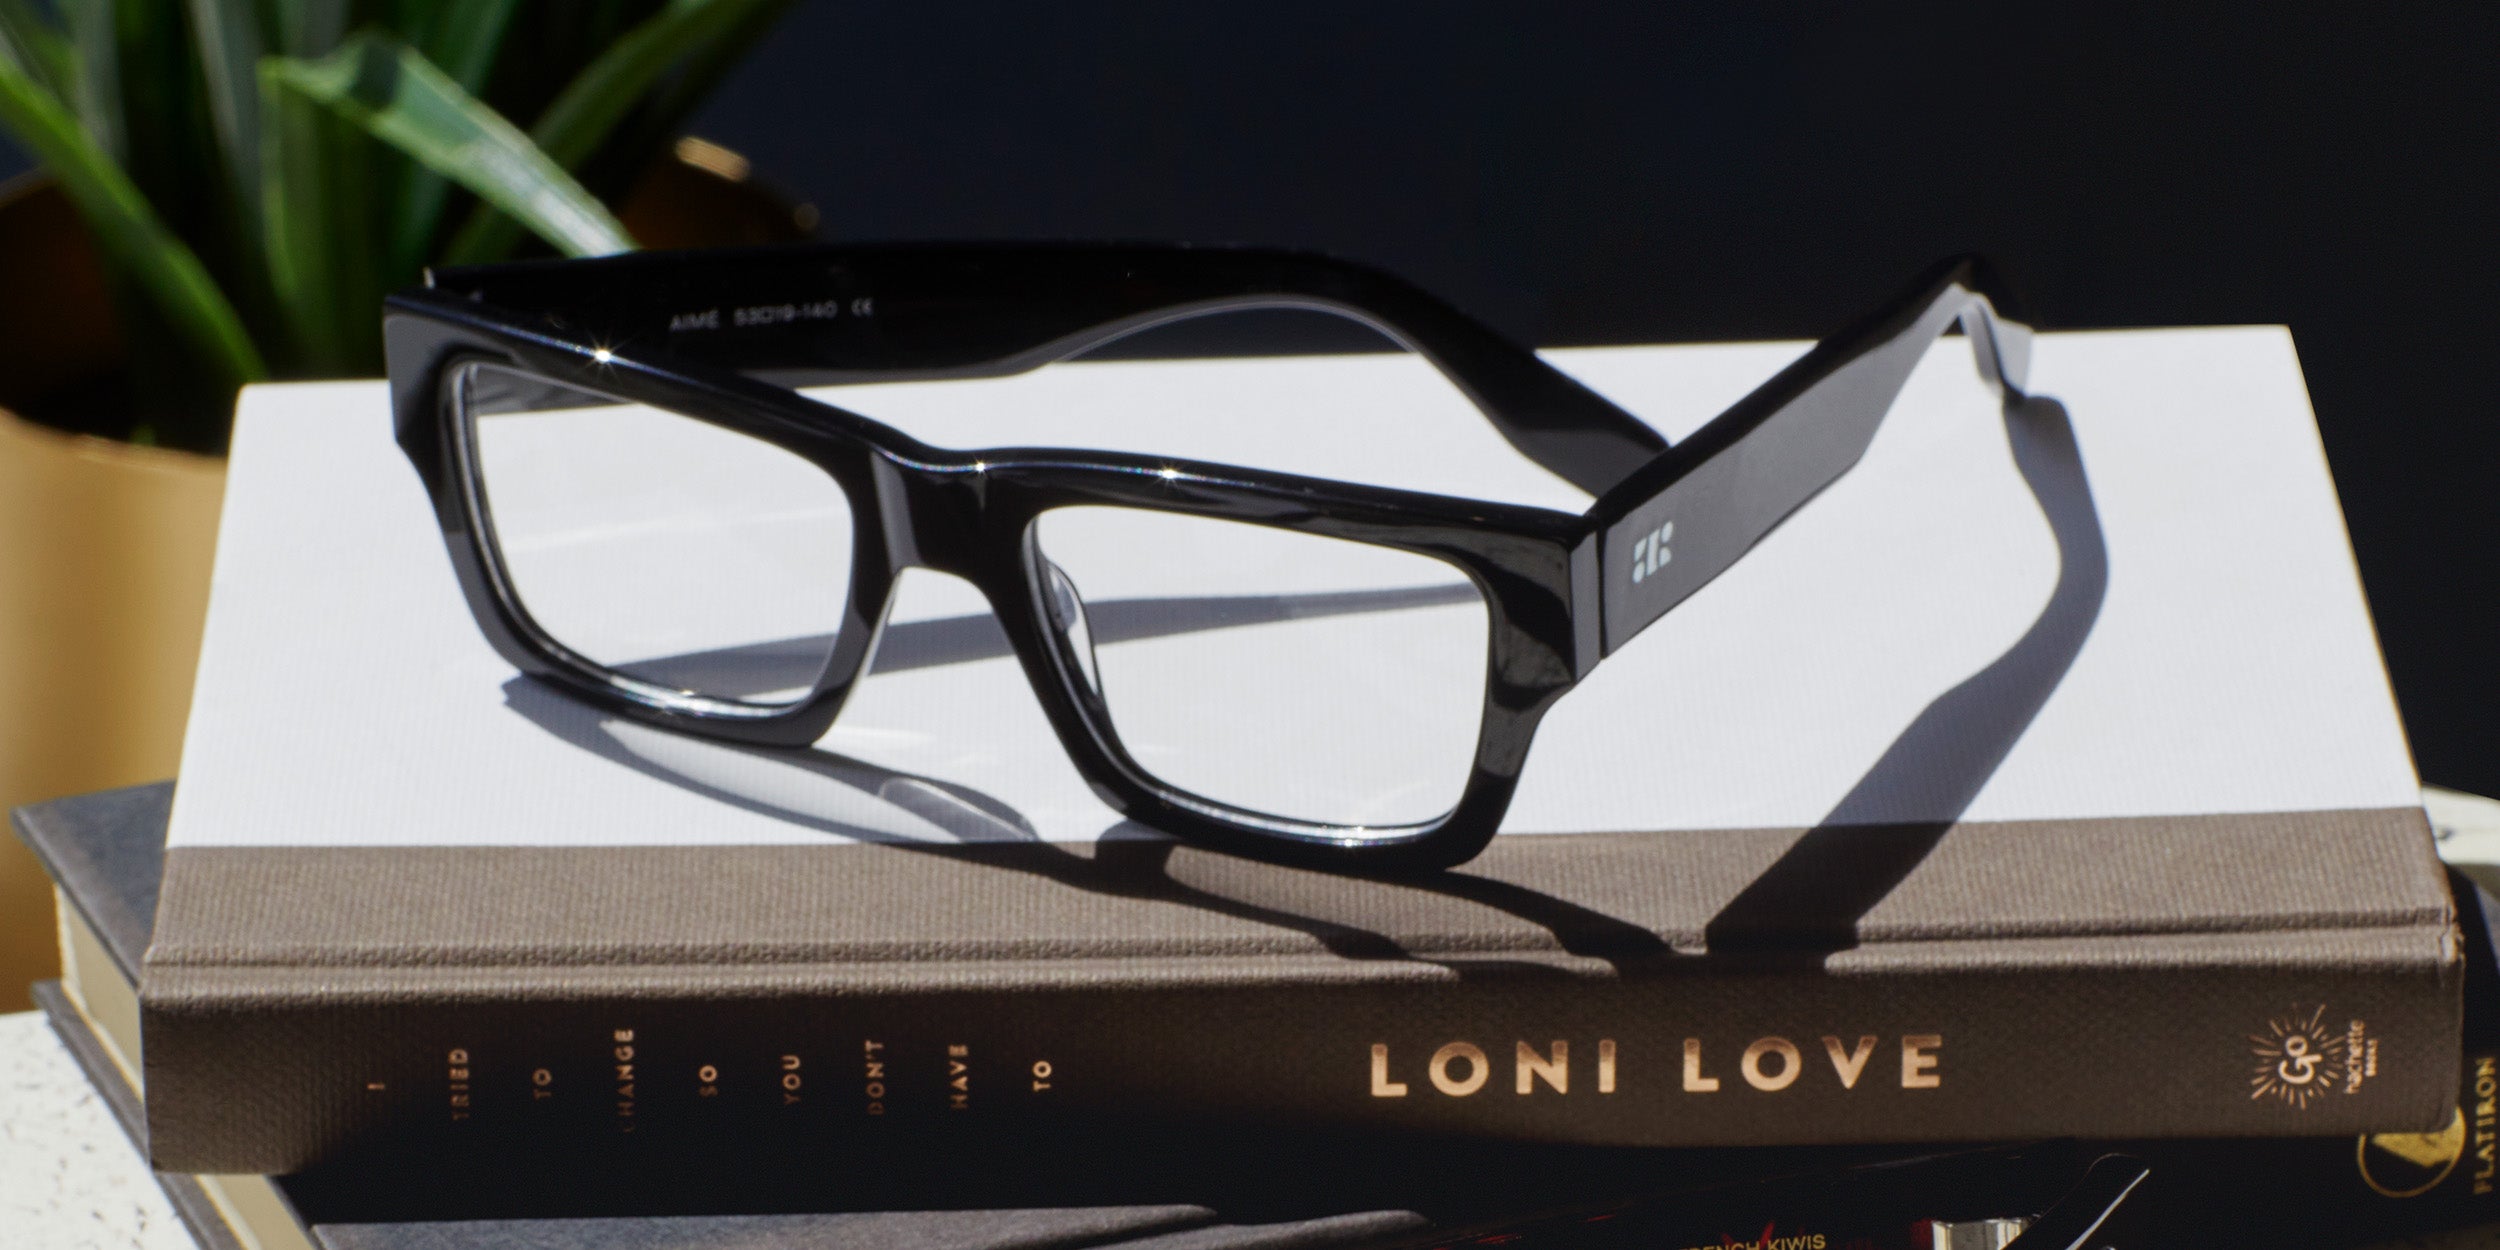 Photo Details of Aimé Black Reading Glasses in a room